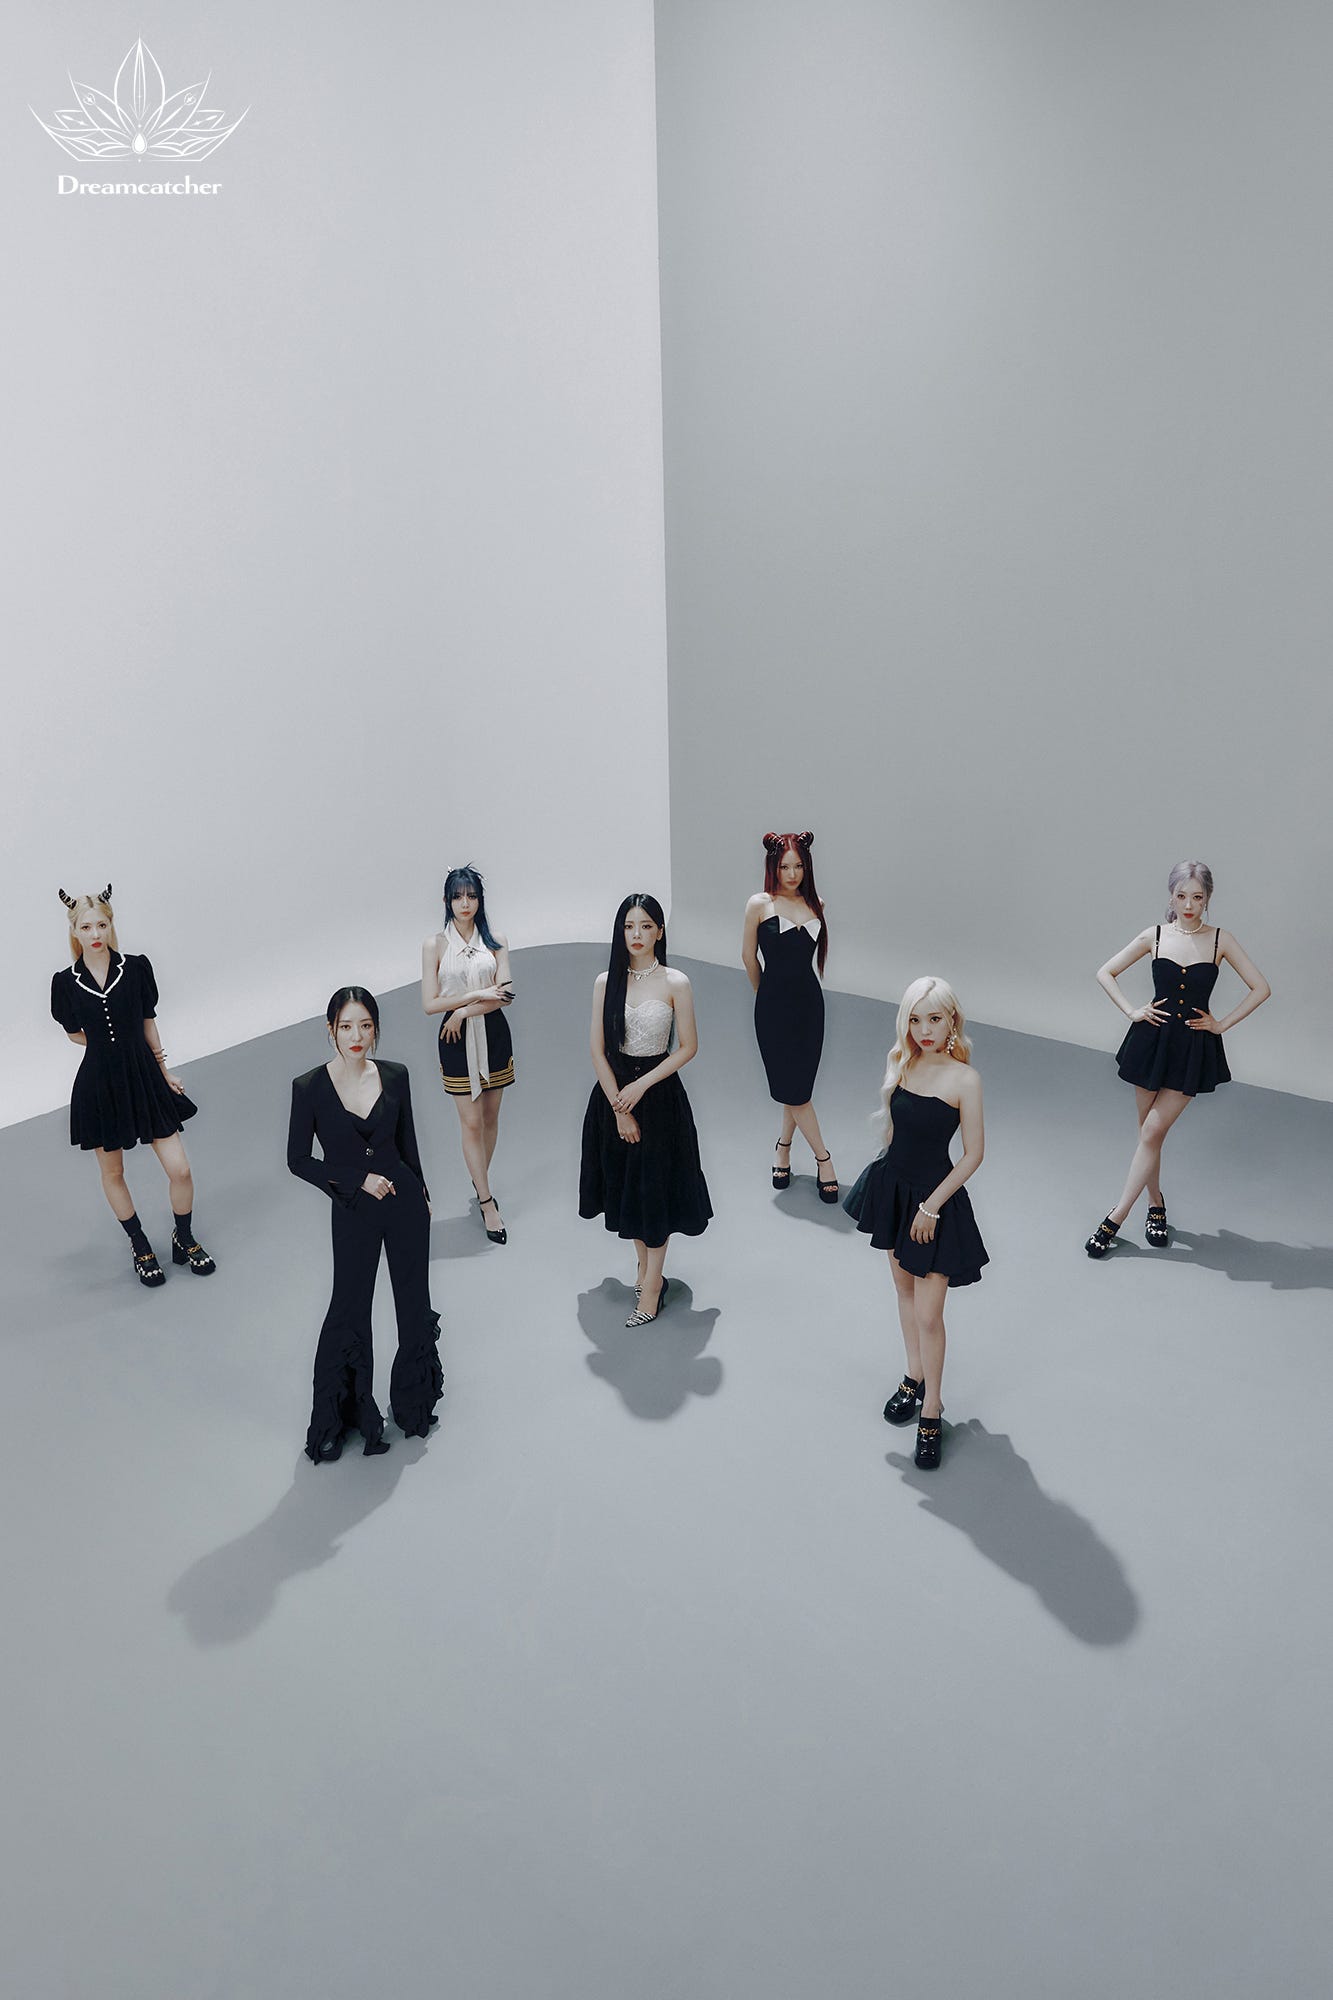 Dreamcatcher group teaser ver. 2, with a white background and farwaway shot with the group standing in front in black and white colors.